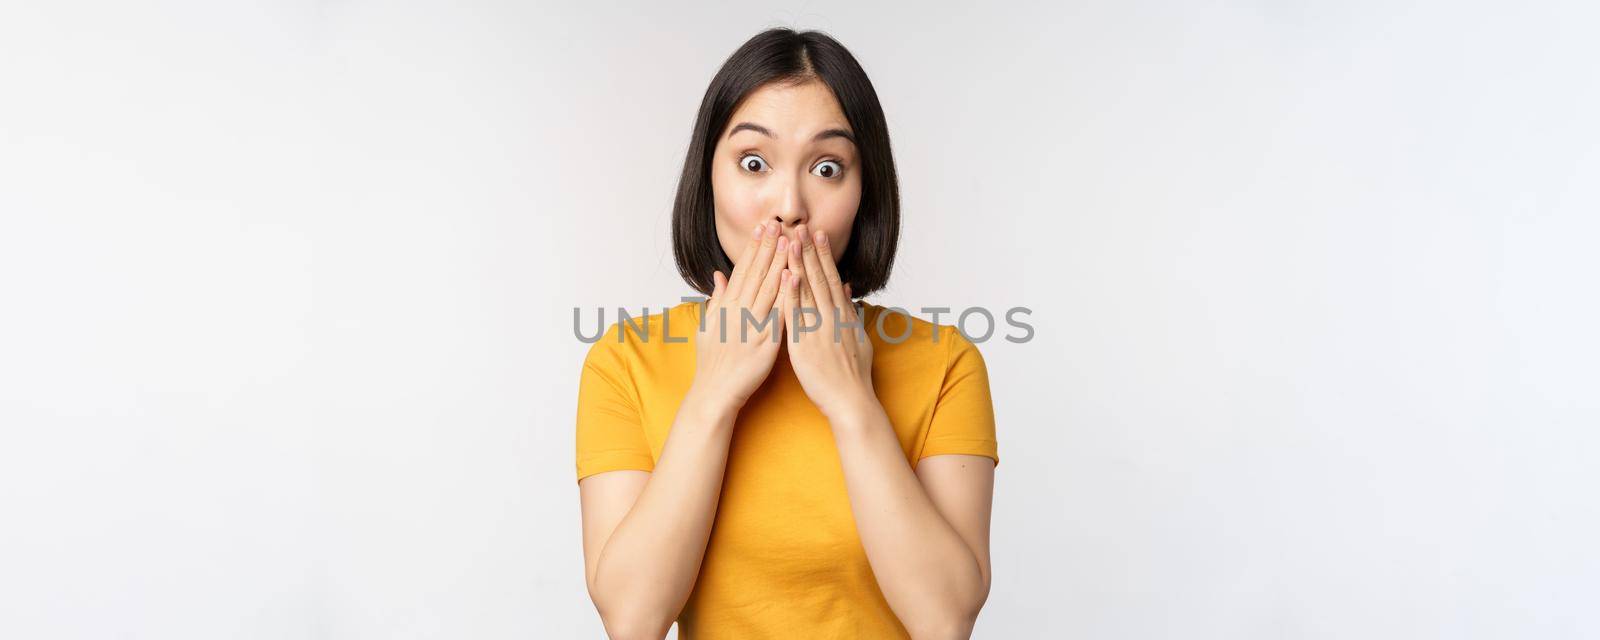 Surprised asian woman gasping, cover mouth with hands and looking amazed at camera, wearing yellow t-shirt, standing over white background.